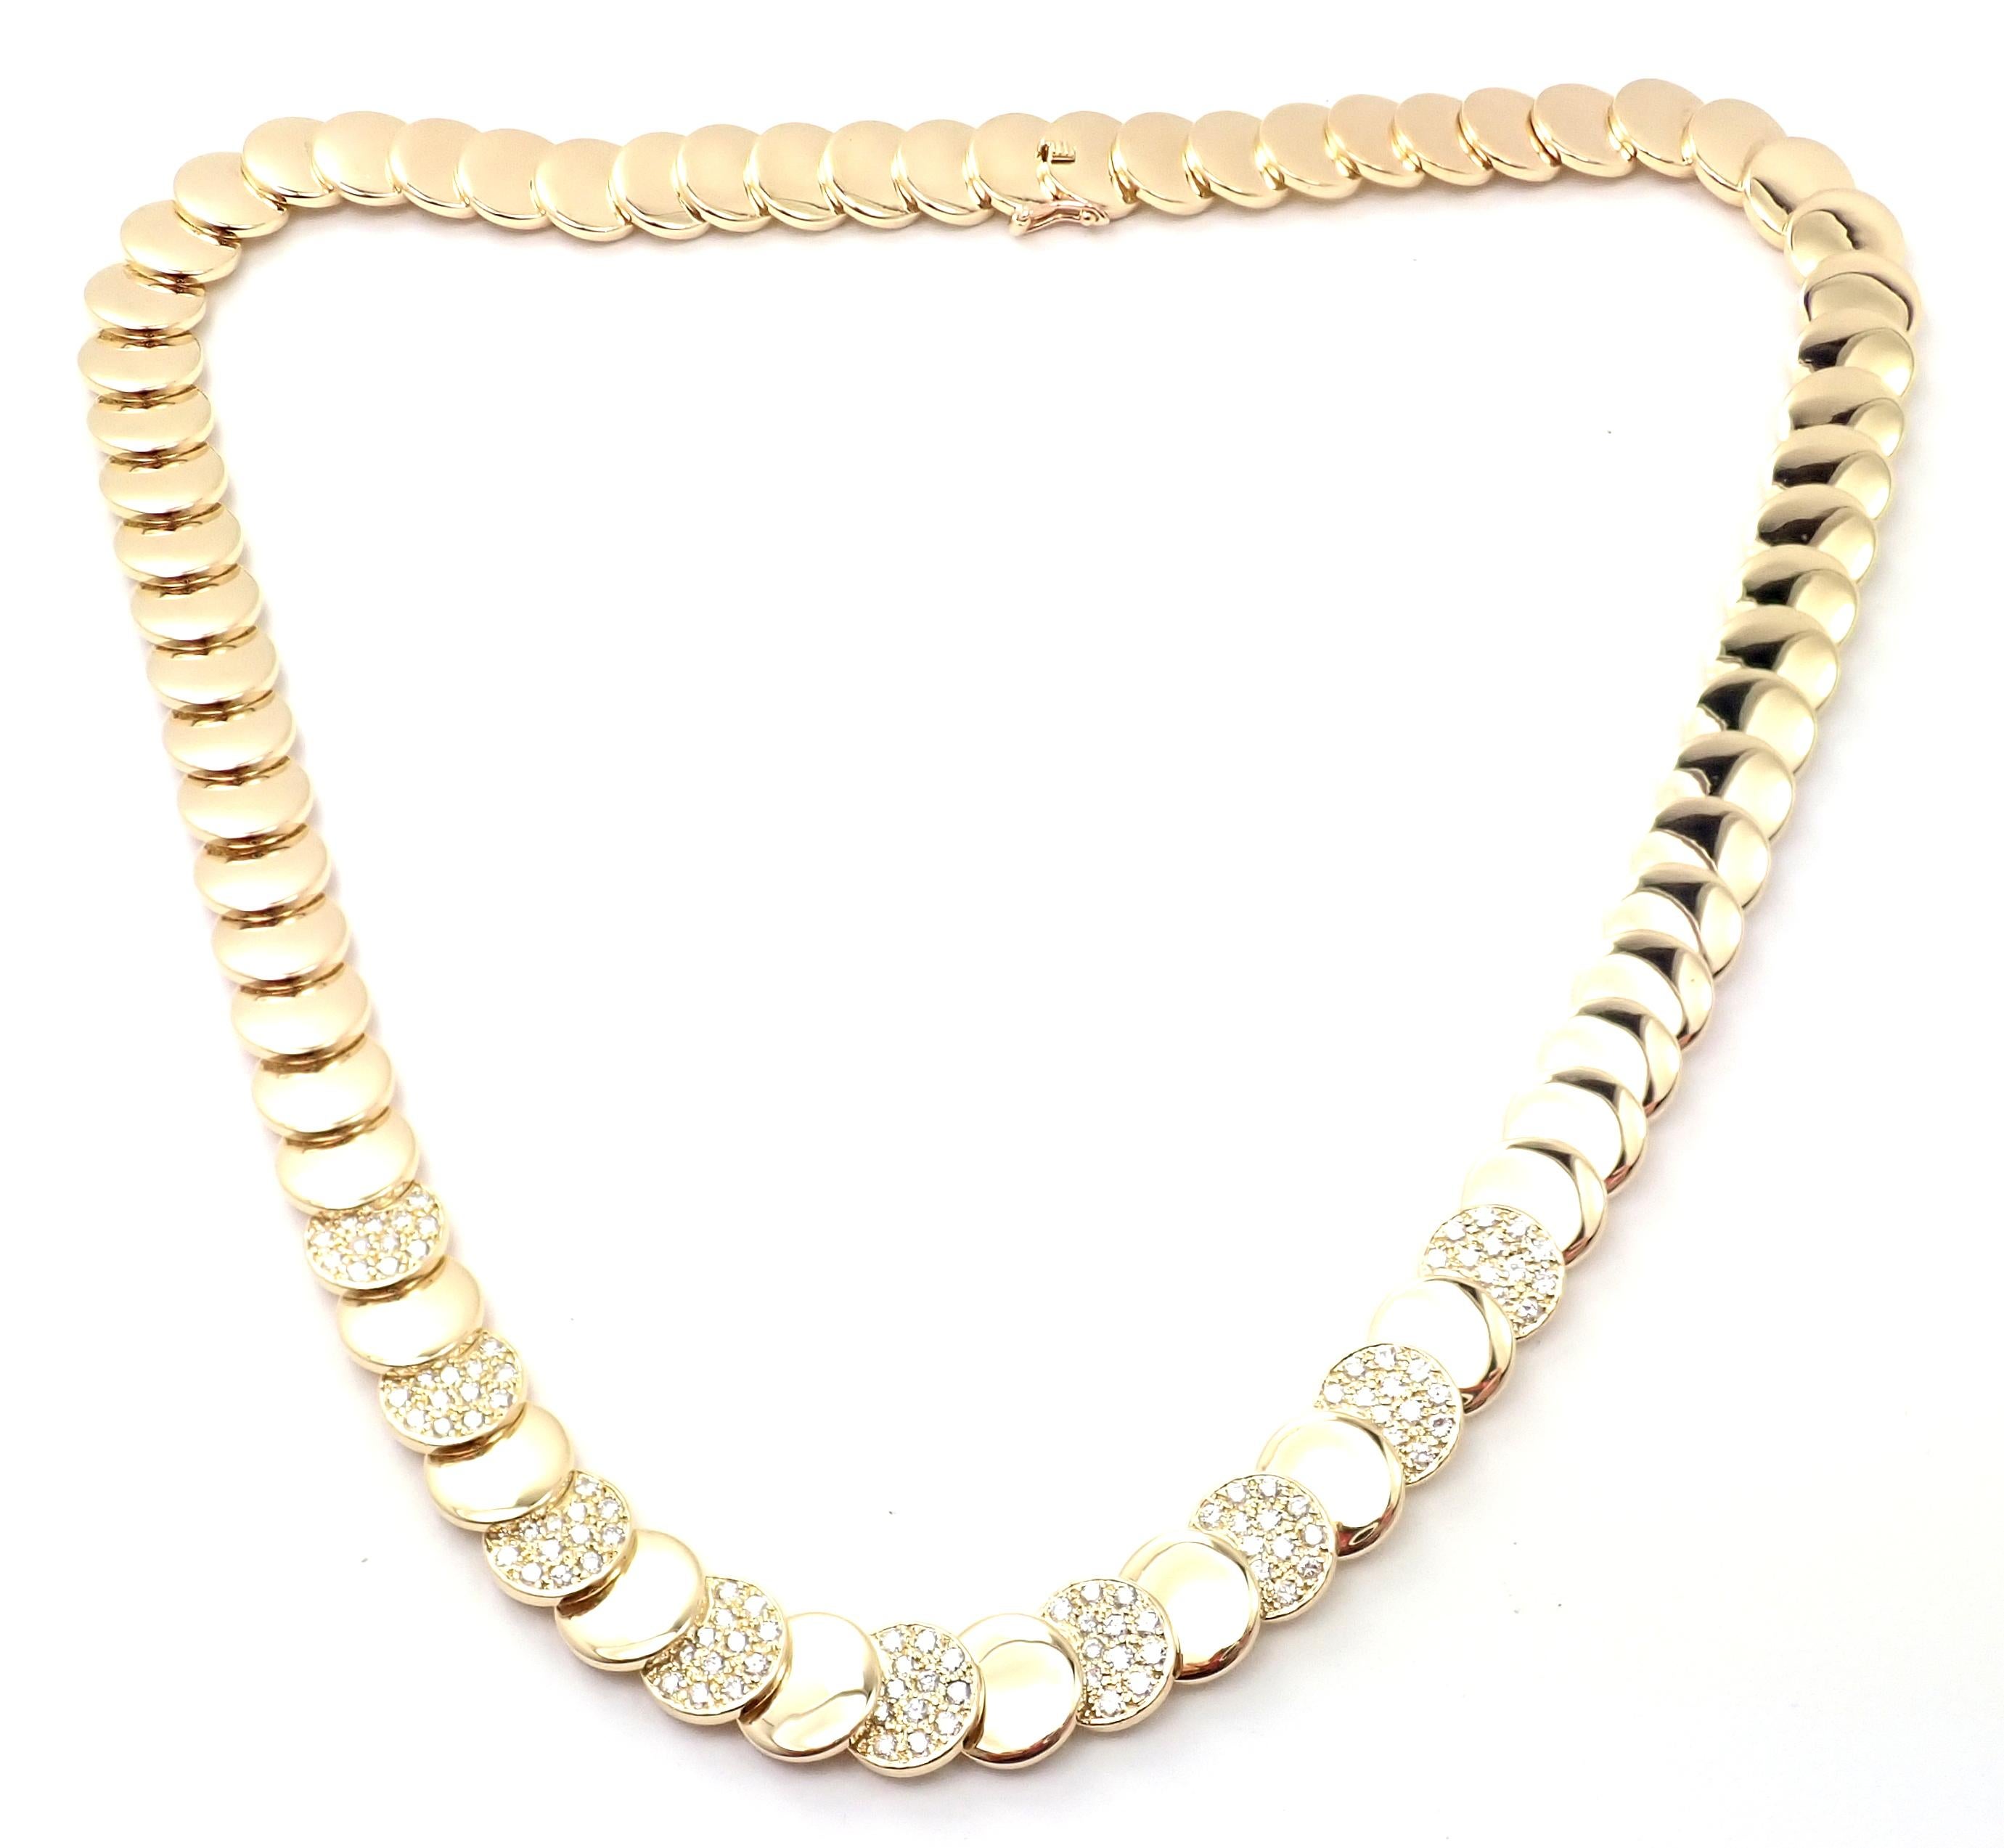 18k Yellow Gold And Diamond Discs Vintage Necklace by Van Cleef & Arpels. 
With 108 round brilliant cut diamond VVS1 clarity, E color
total weight approx. 1.64ct
This necklace comes with service paper from a VCA store in NYC.
Details: 
Length: